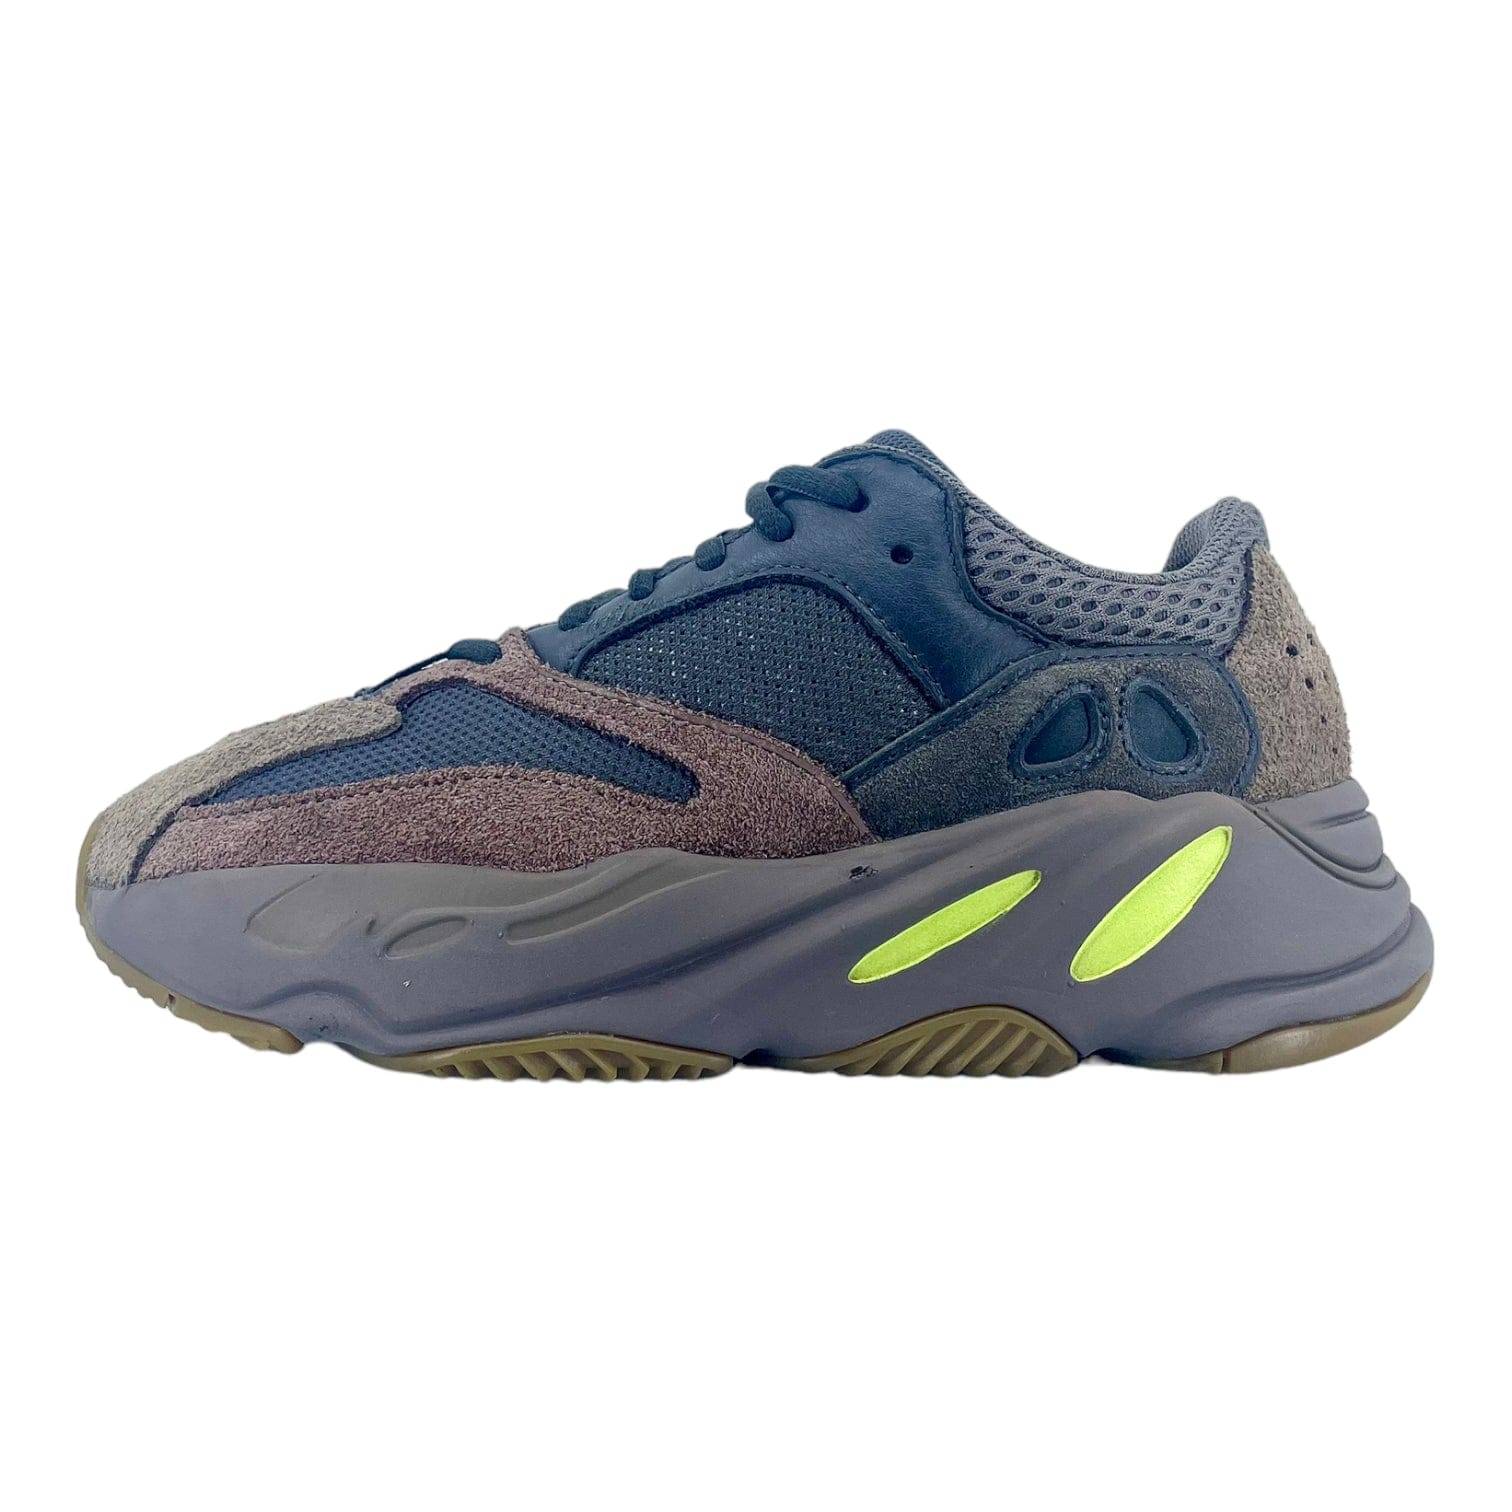 adidas Yeezy Boost 700 Mauve Pre-Owned – Origins NYC